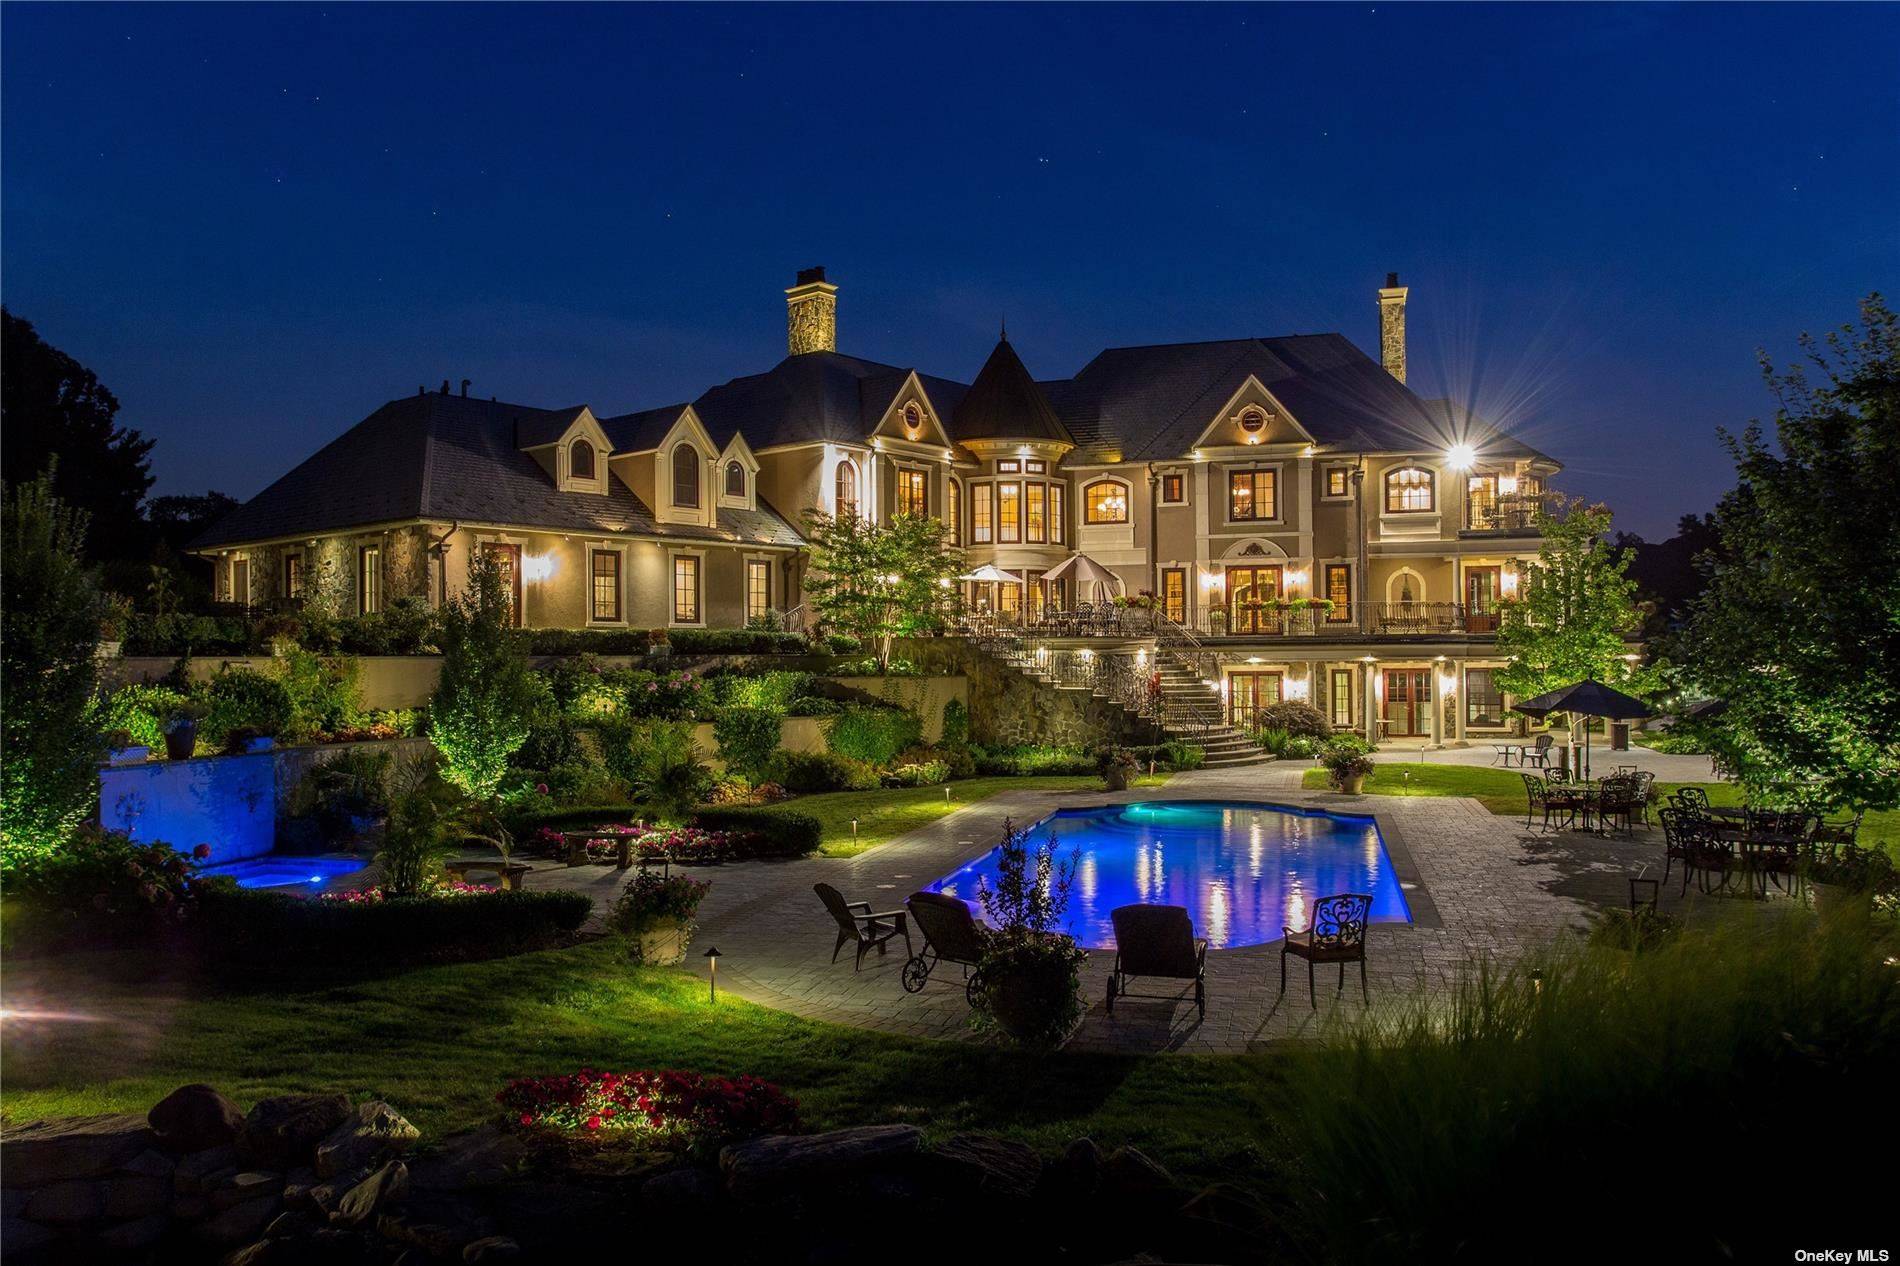 Home of champions, this magnificent 5 acre estate will win your heart.